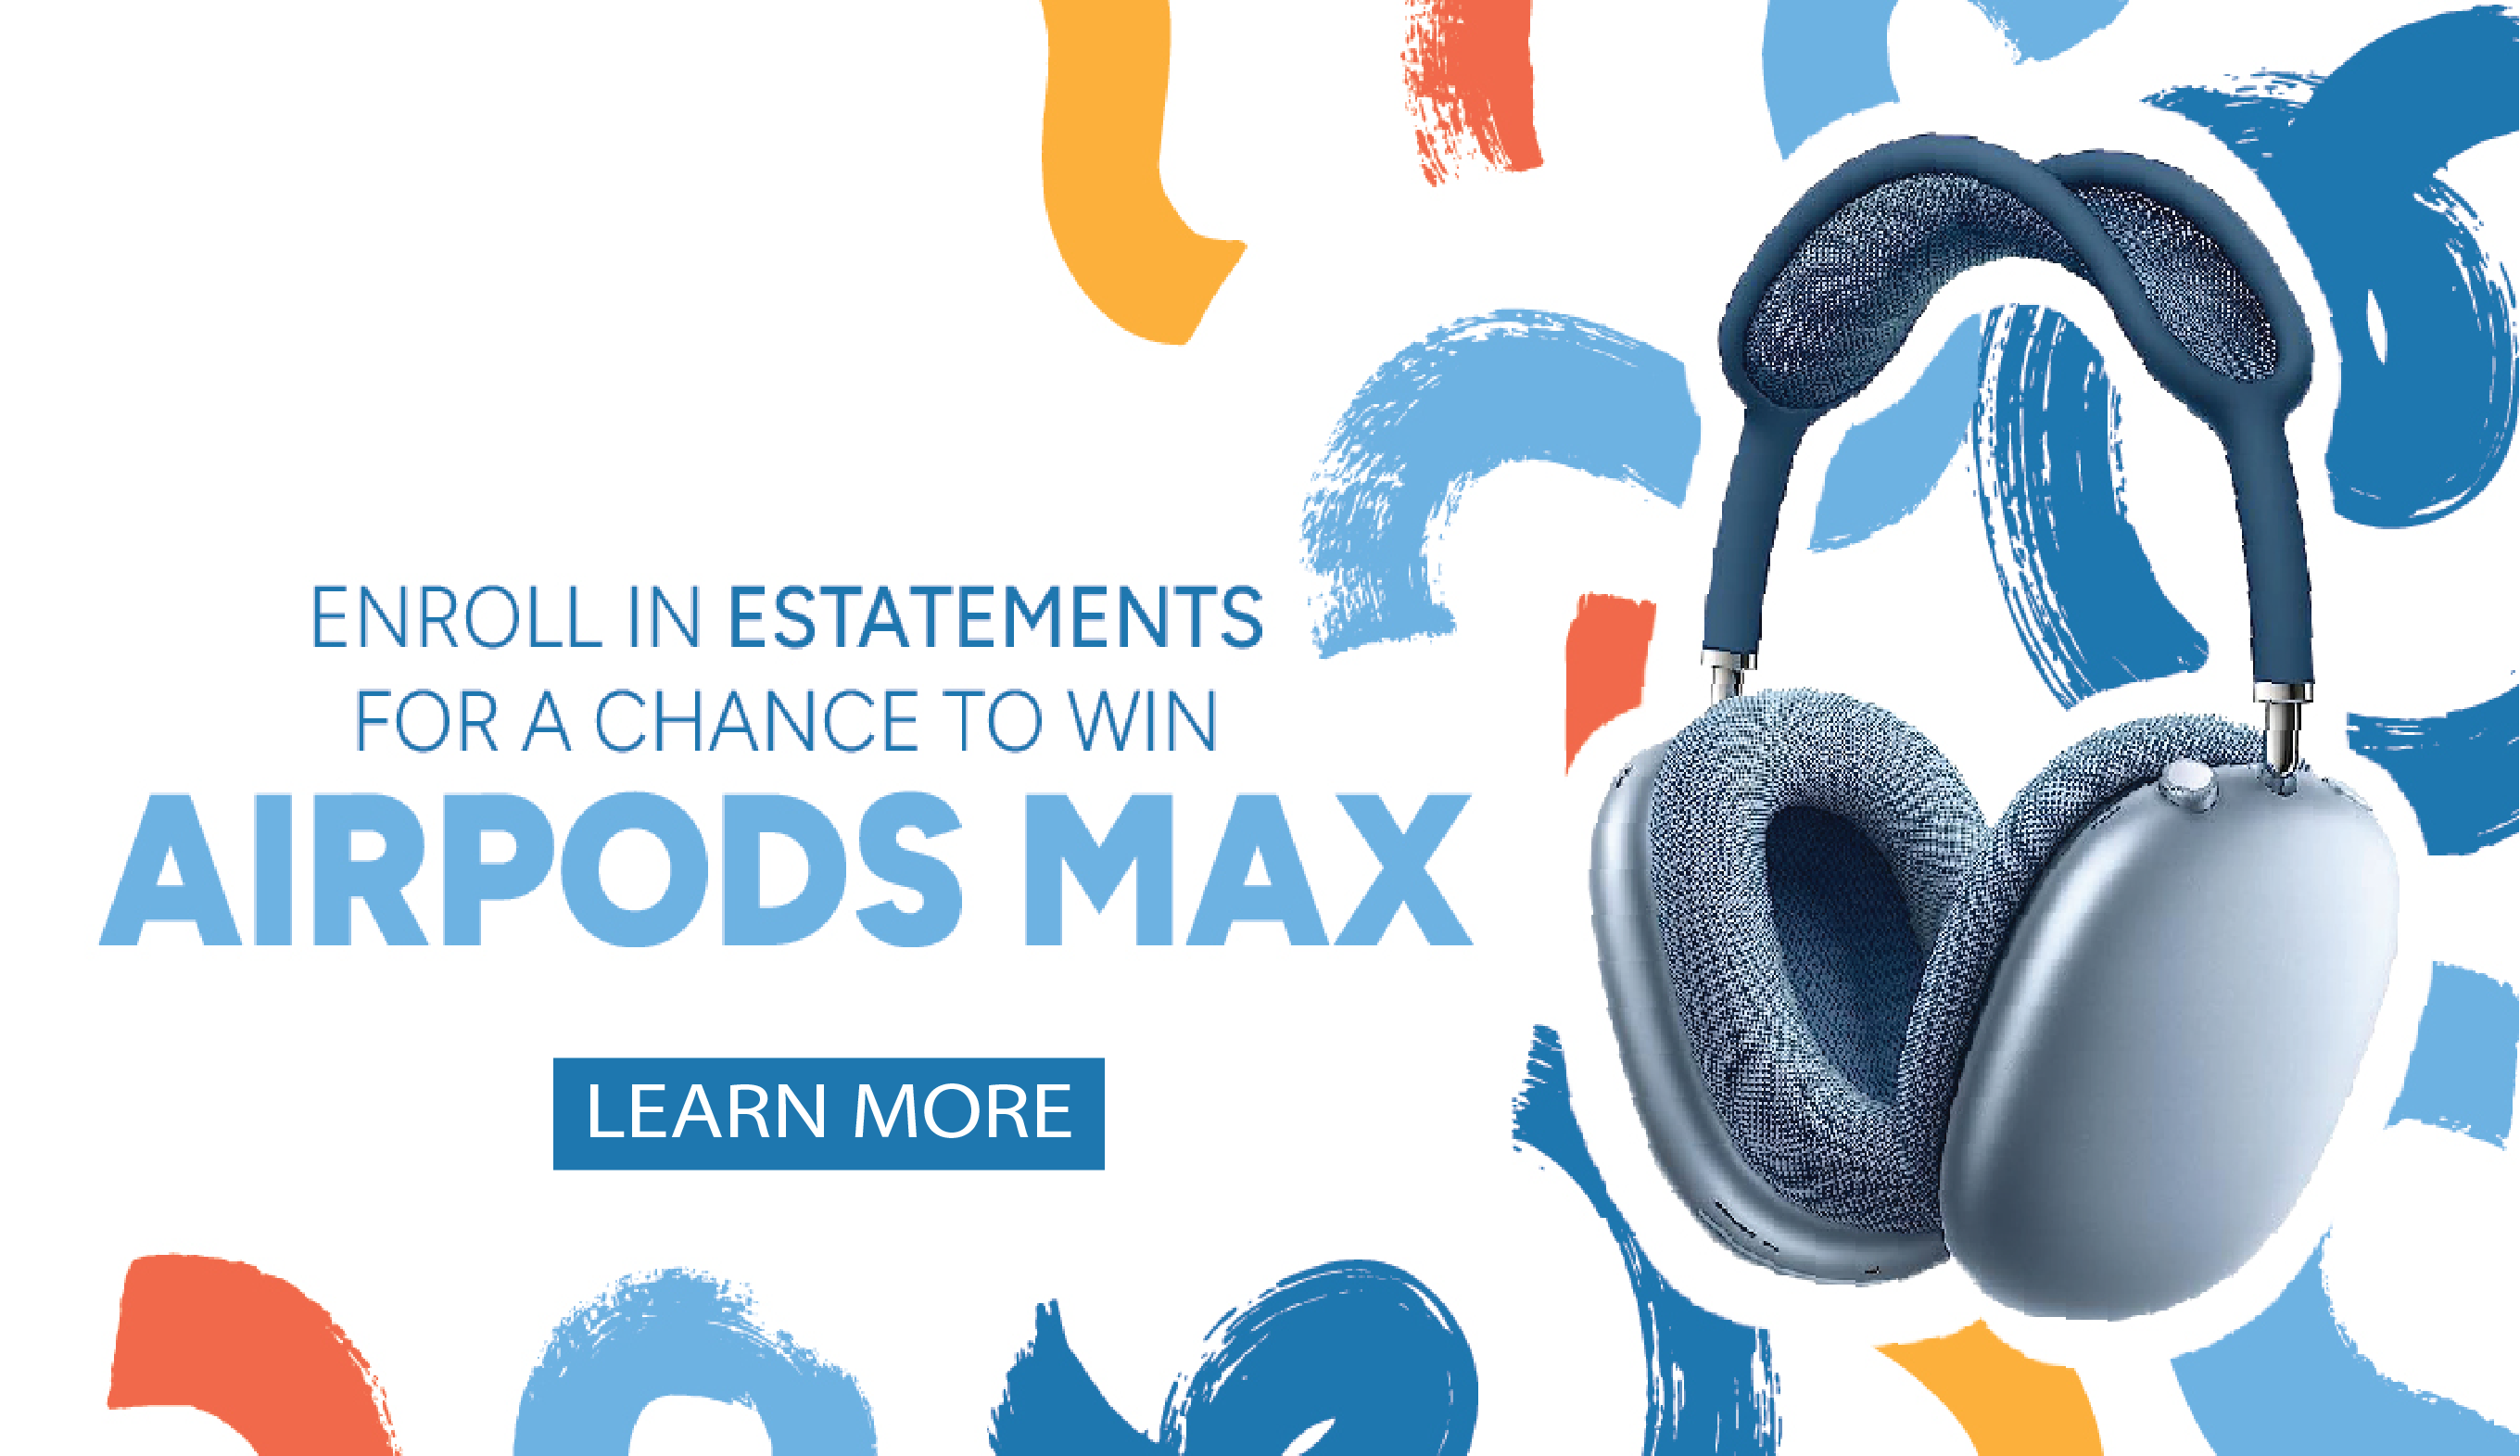 ENROLL IN ESTATEMENTS FOR A CHANCE TO WIN AIRPODS MAX